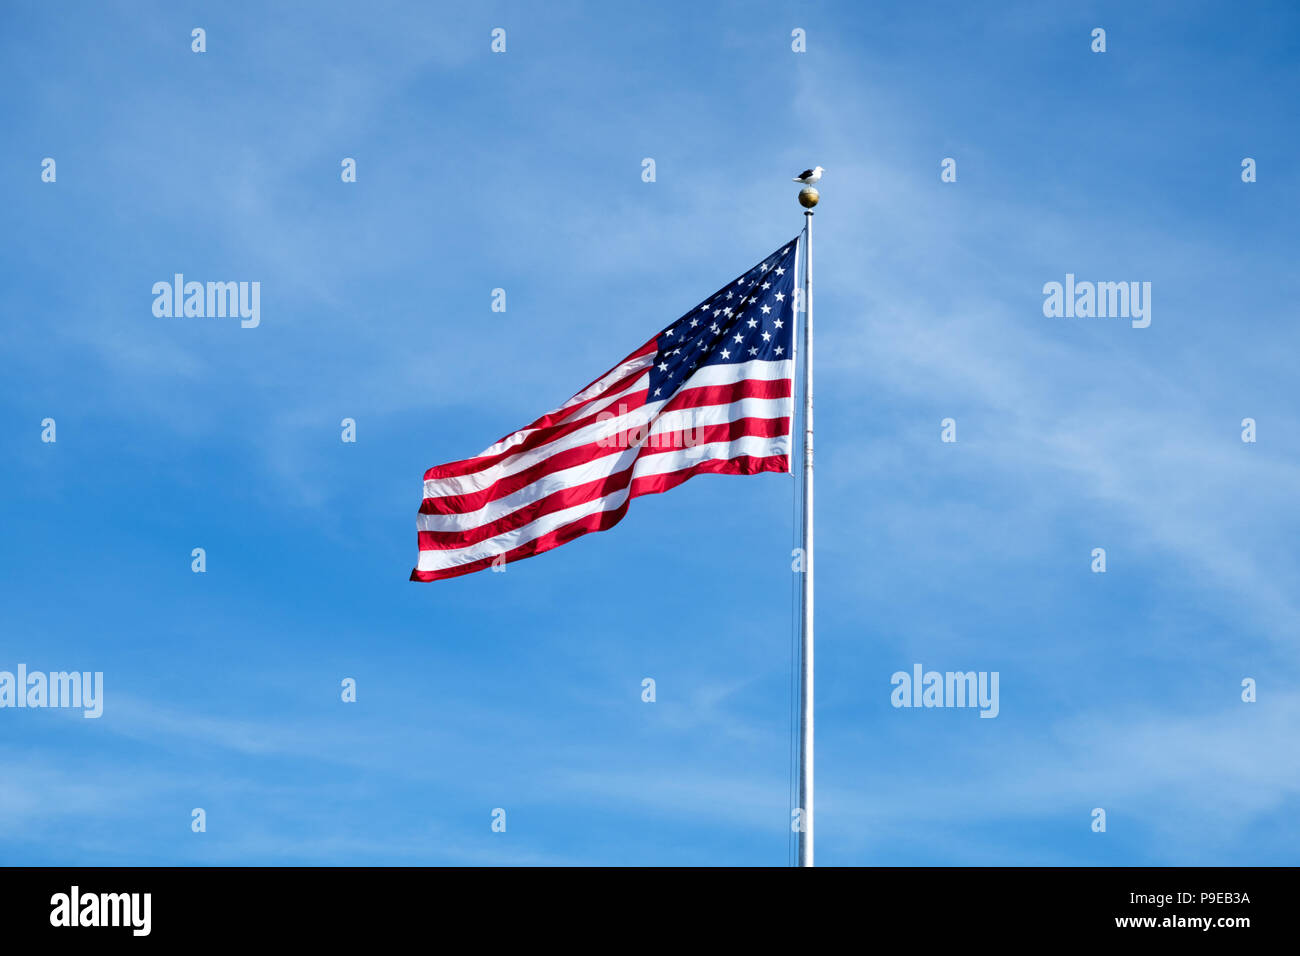 American flag raised on a flag pole with negative space and blue sky Stock Photo